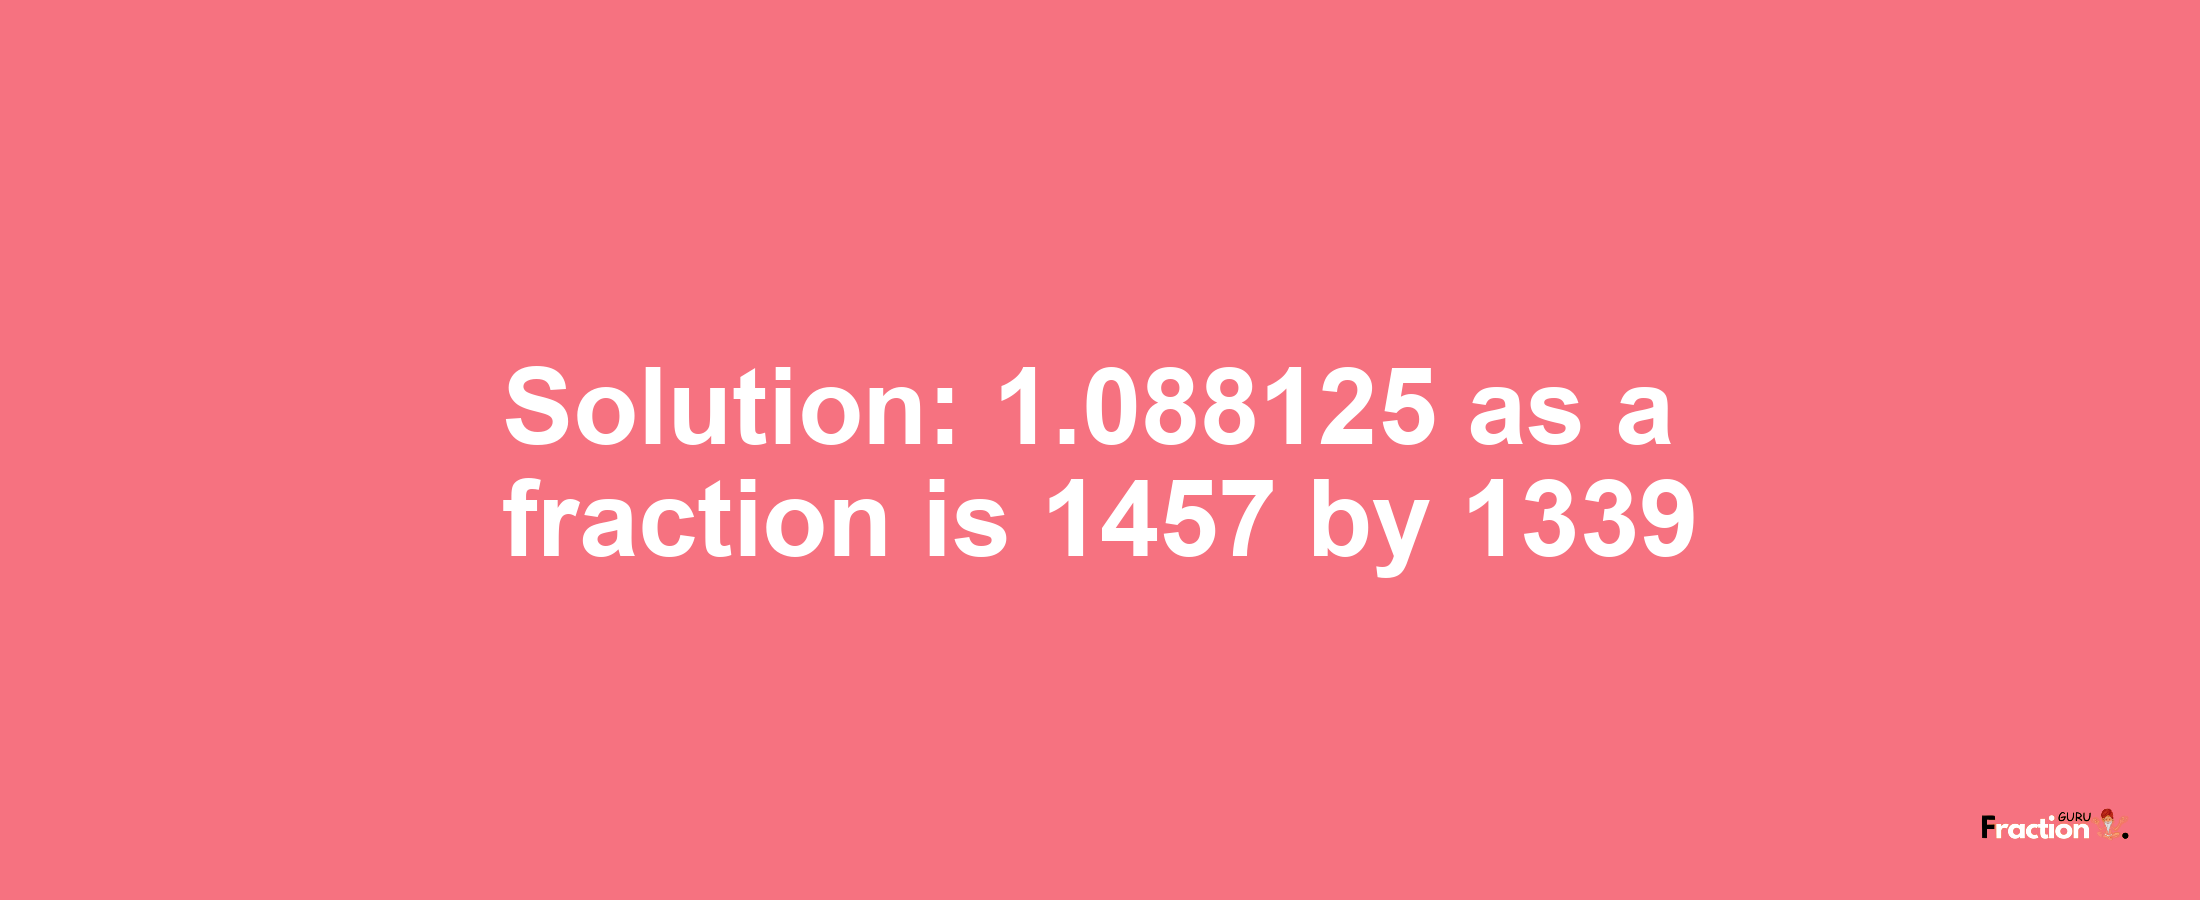 Solution:1.088125 as a fraction is 1457/1339